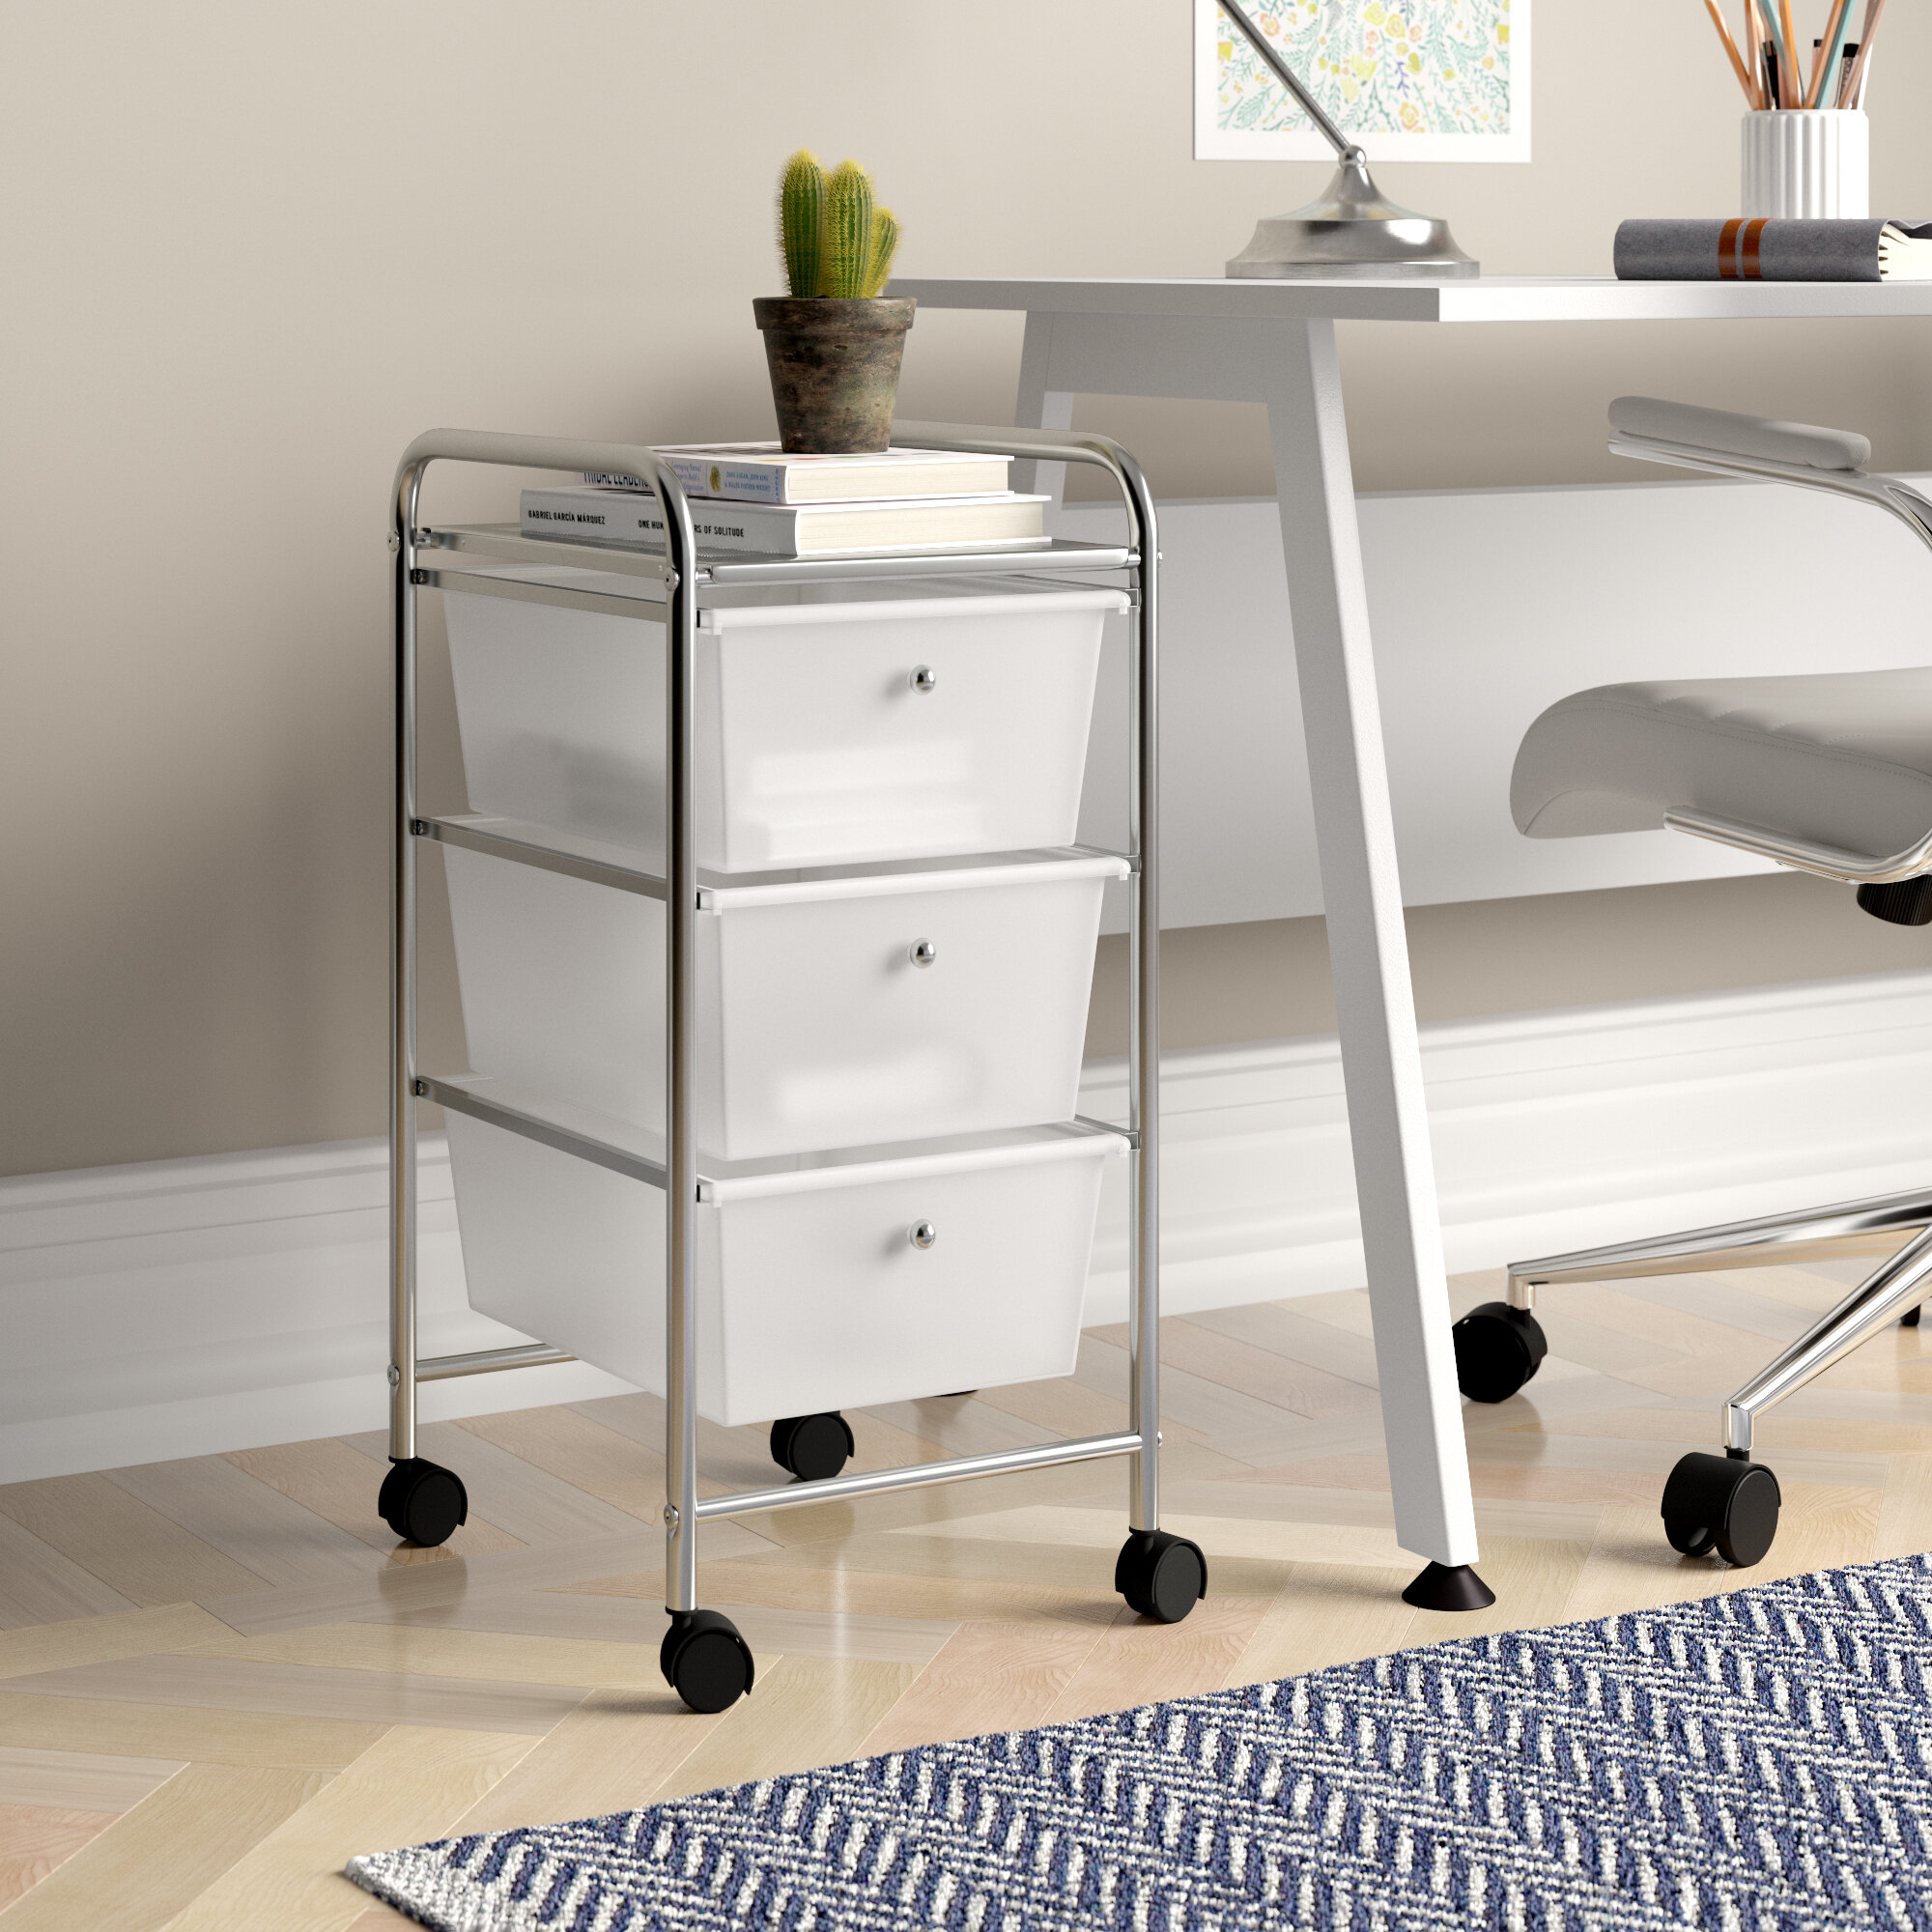 Symple Stuff Utility Cart With 3 Drawers Reviews Wayfair Co Uk